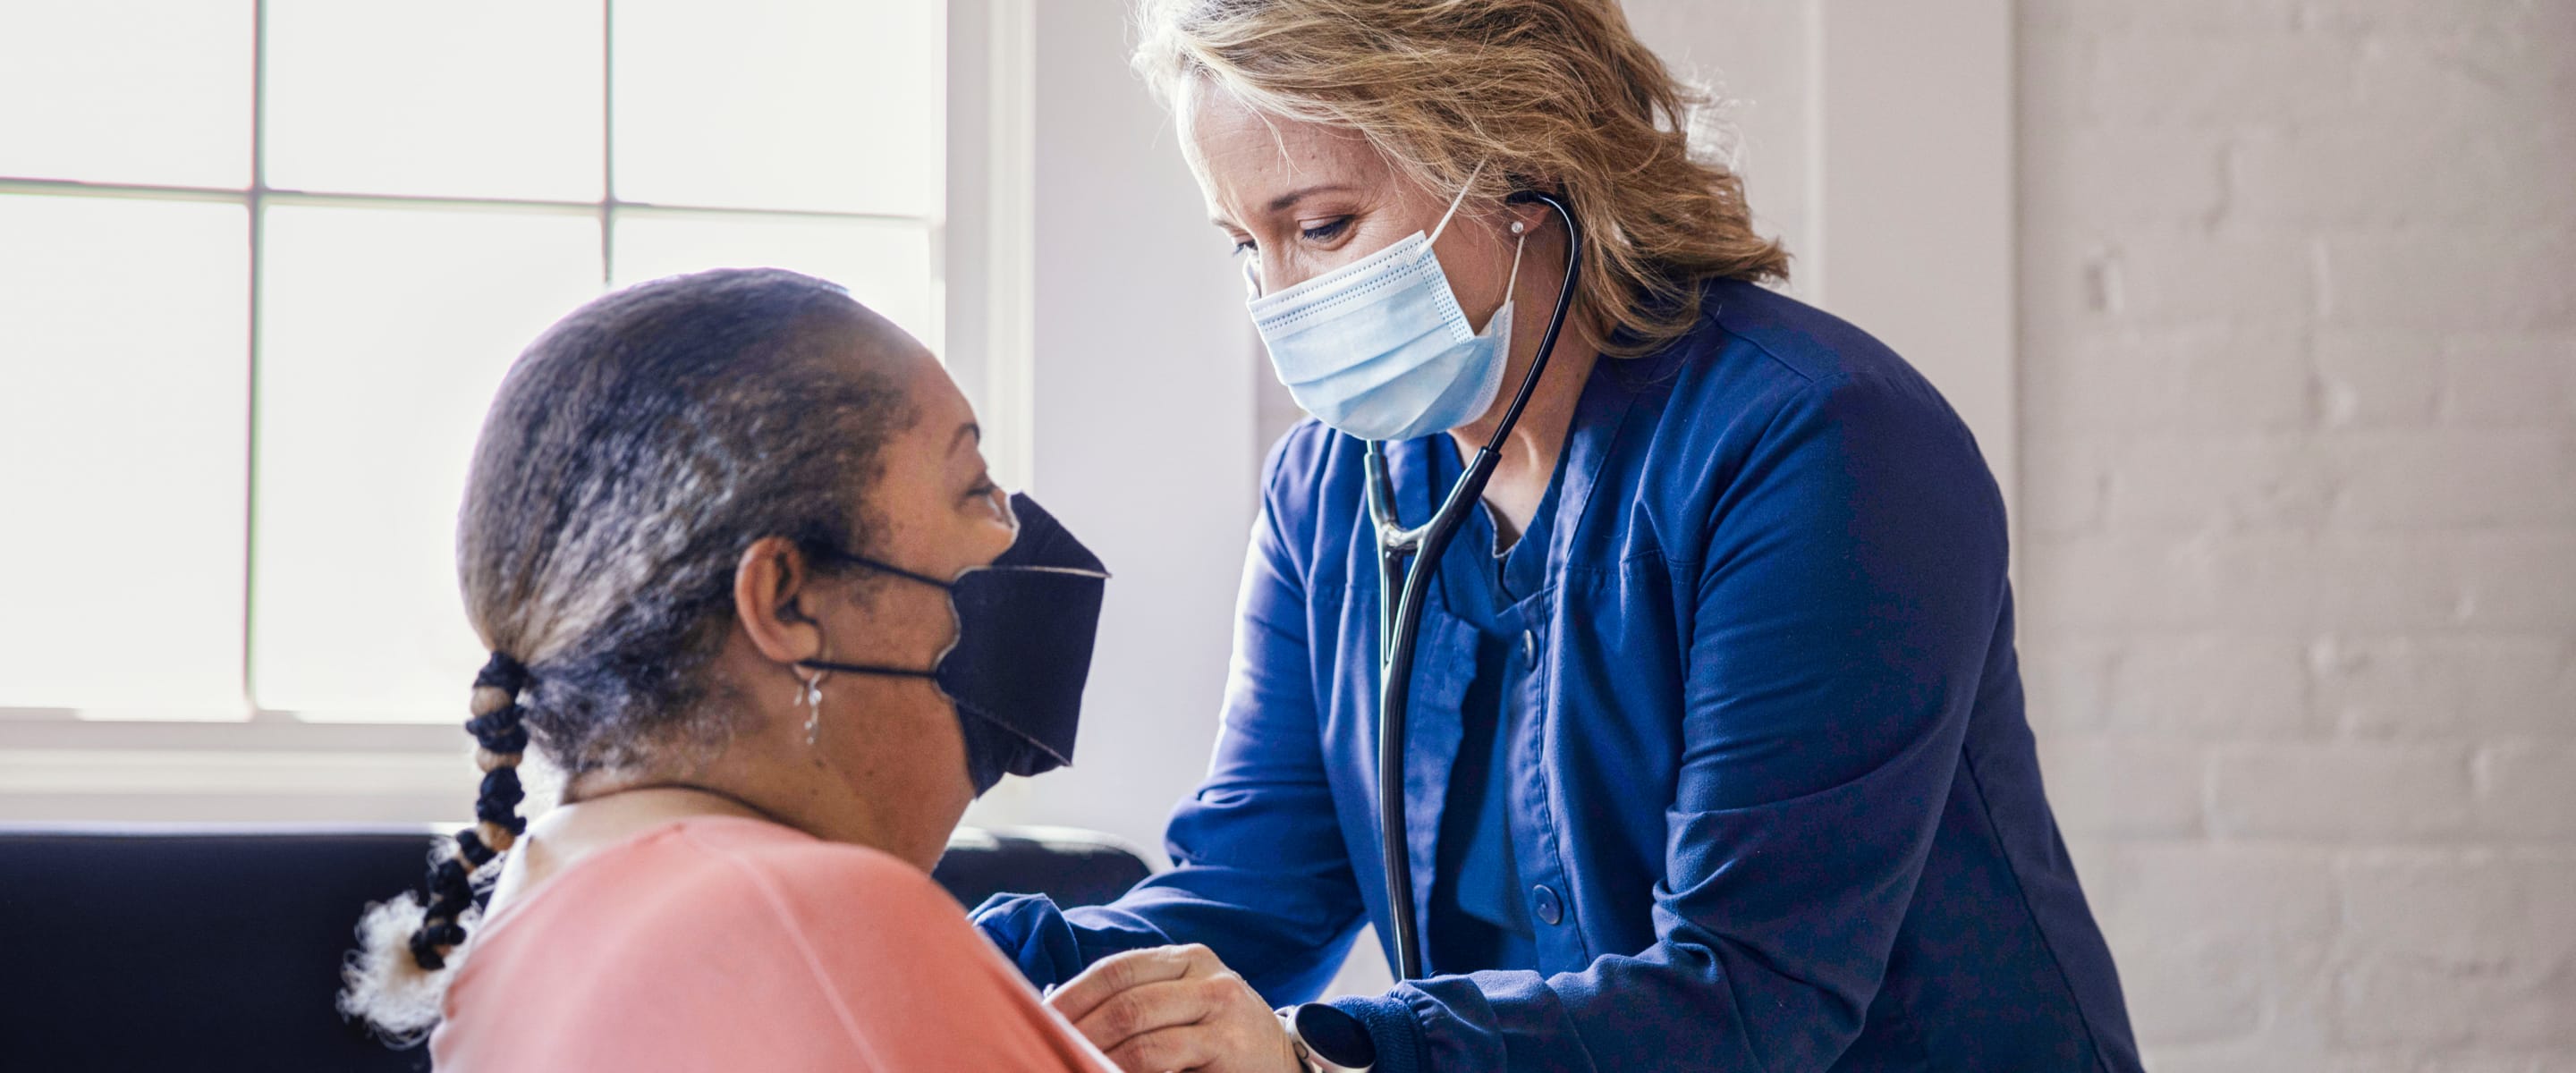 A nurse wearing a mask with a stethoscope leaning in on a woman sitting down with a mask.